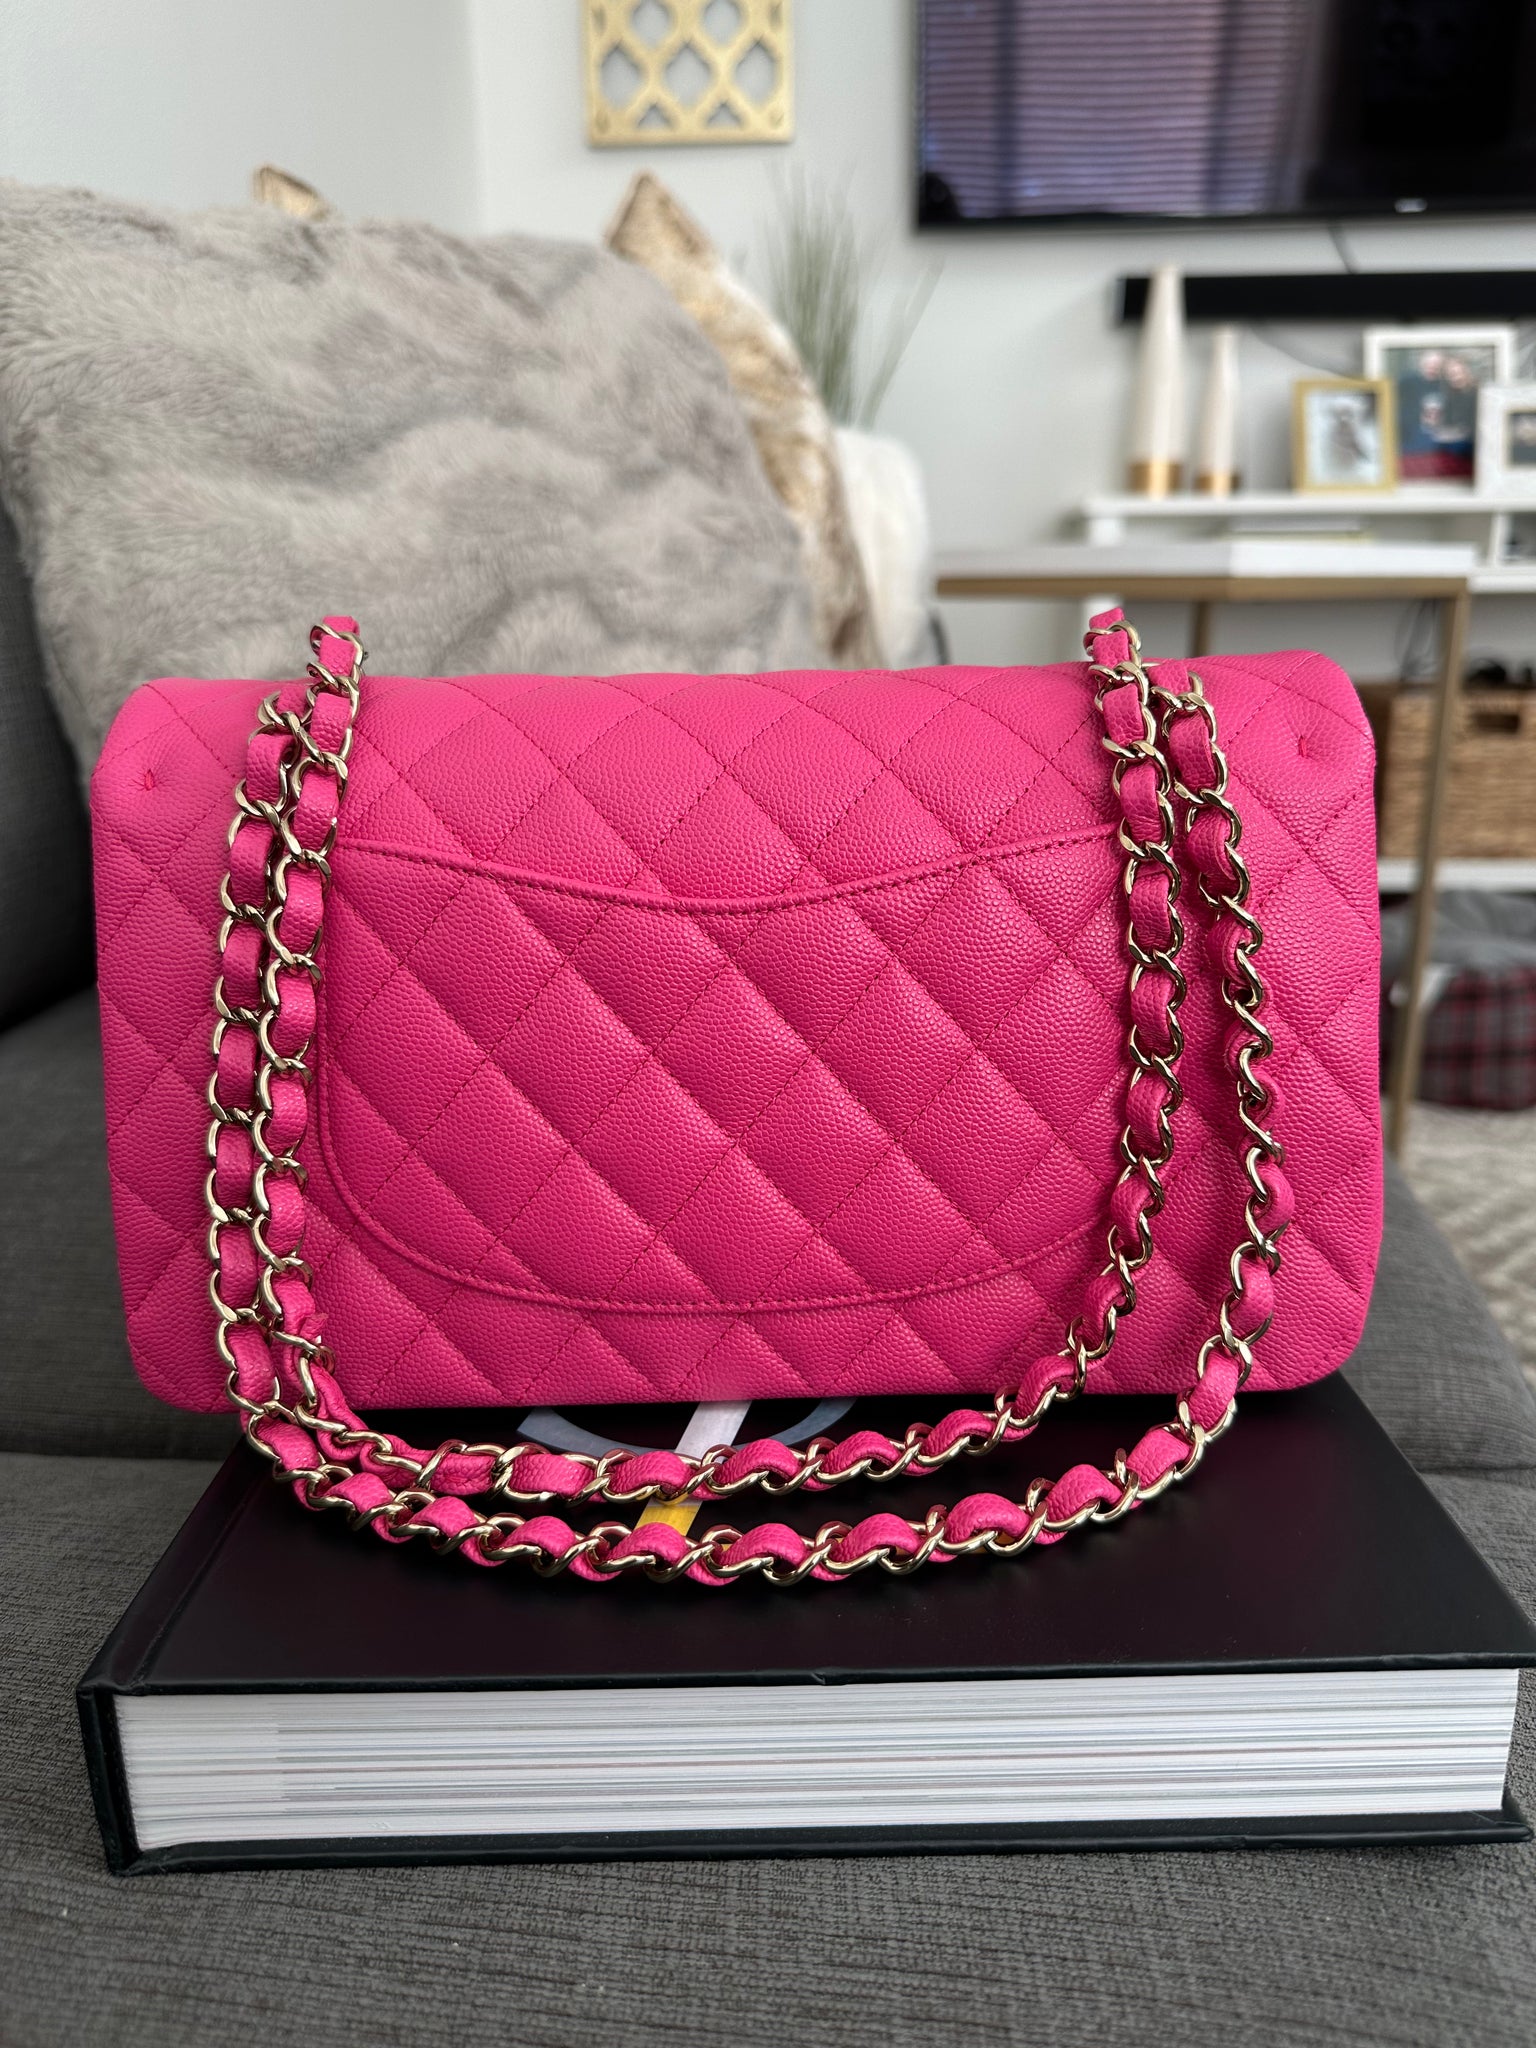 Chanel Classic Medium Double Flap Quilted Leather Shoulder Bag Neon Pink